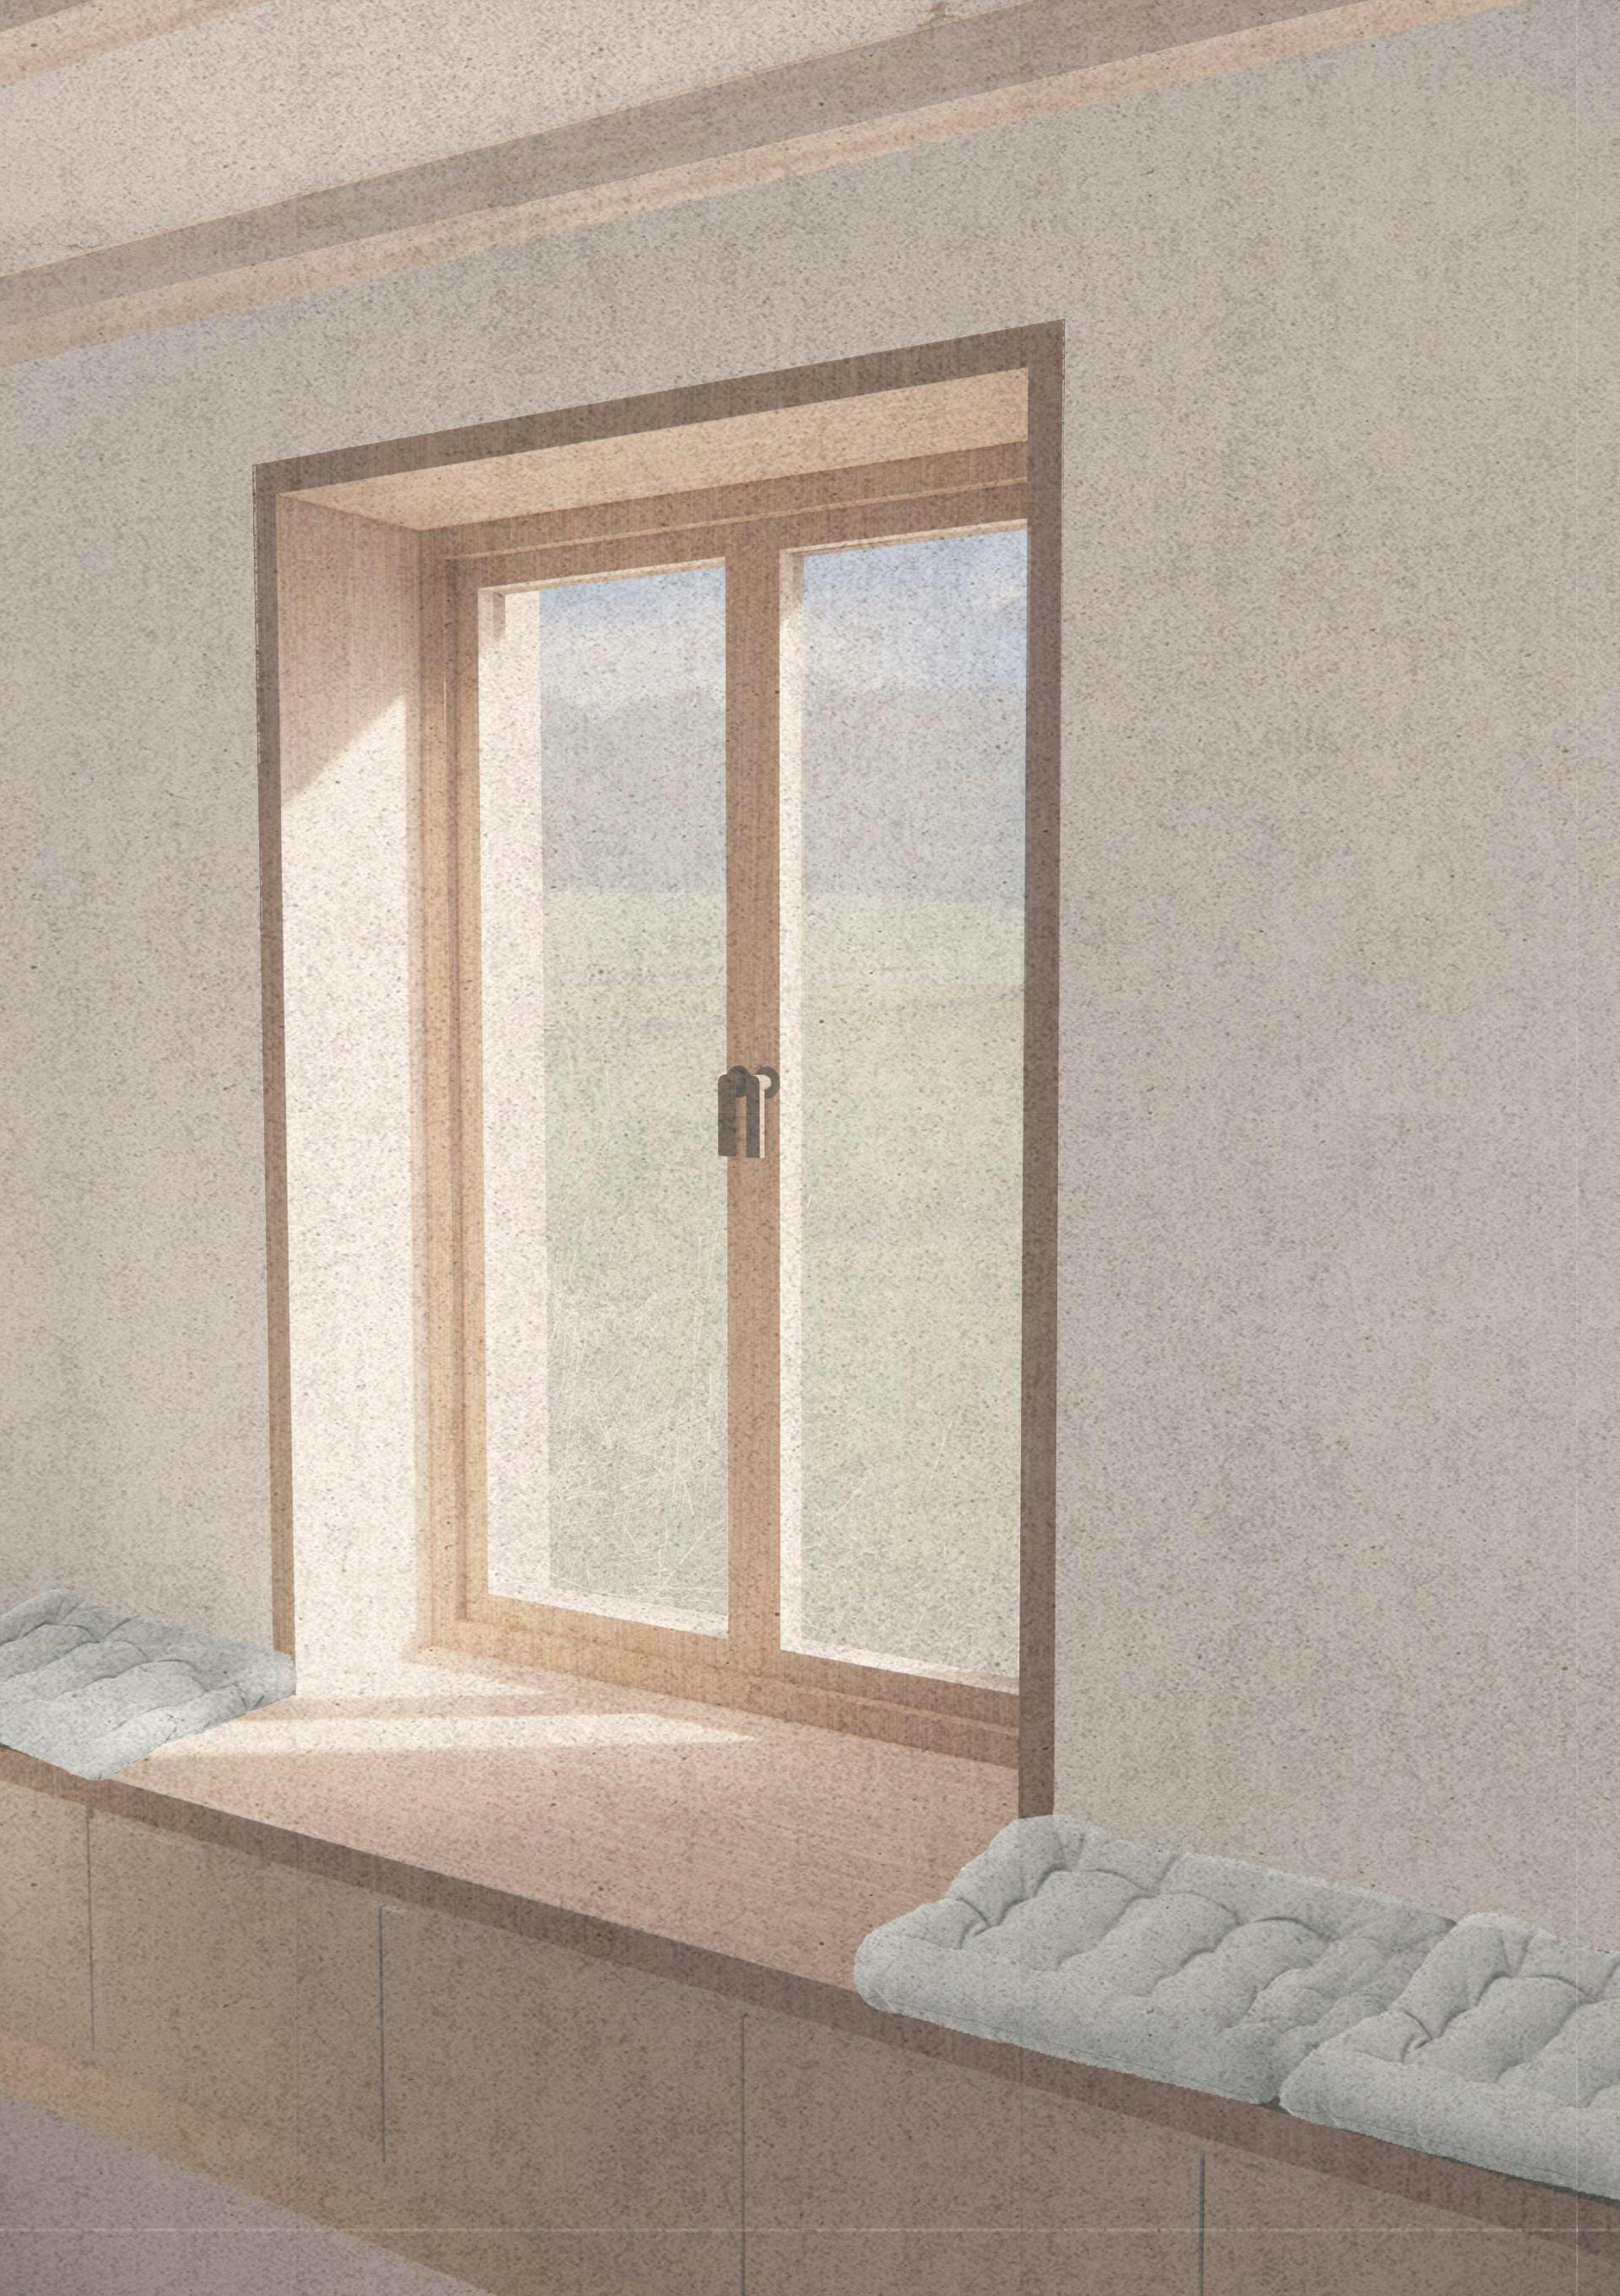 Architectural visualisation of internal window seat in the Shropshire Farm